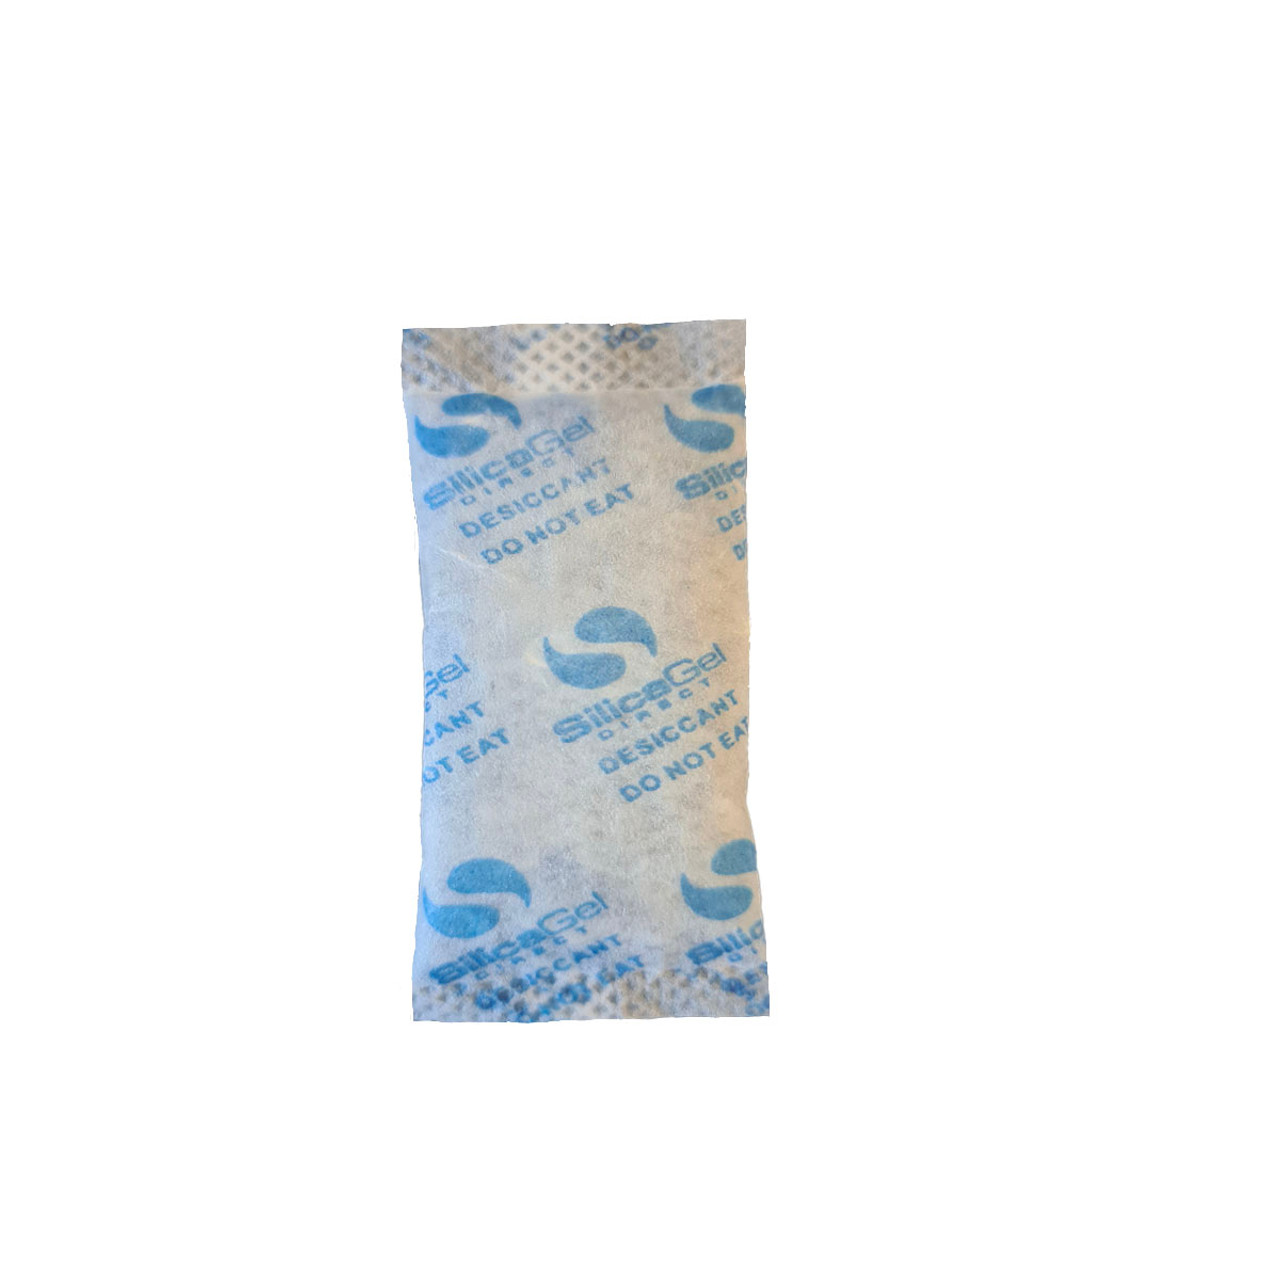 2gm Silica Gel Moisture Absorber Aiwa Paper Desiccant Packets 